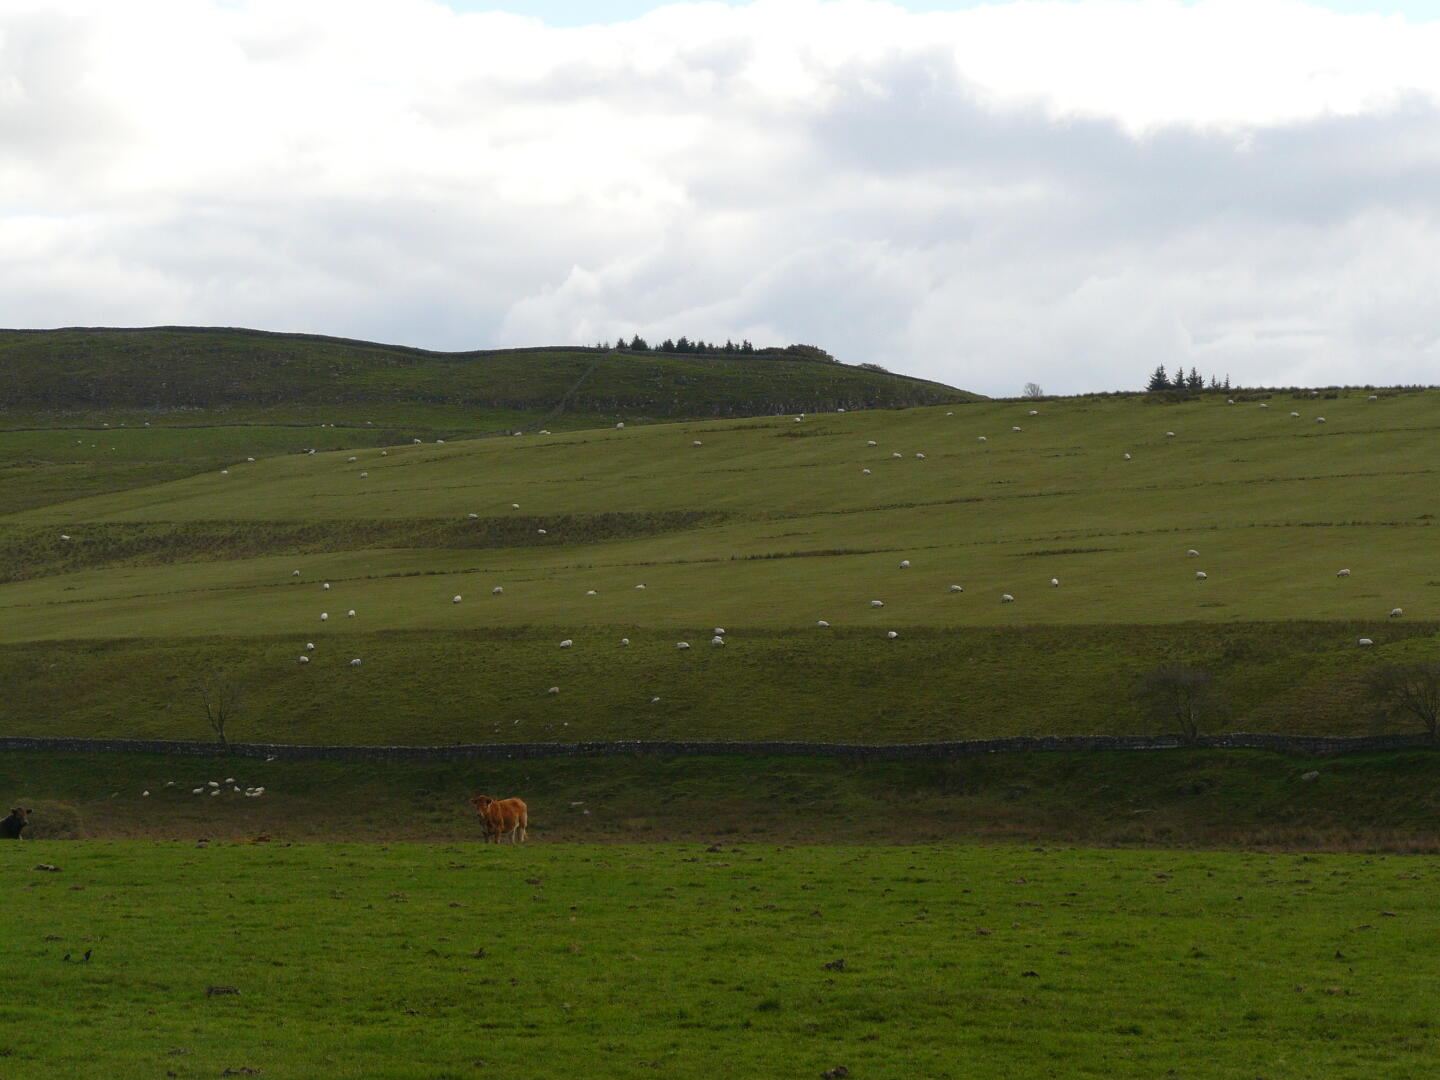 All the white spots are sheep.